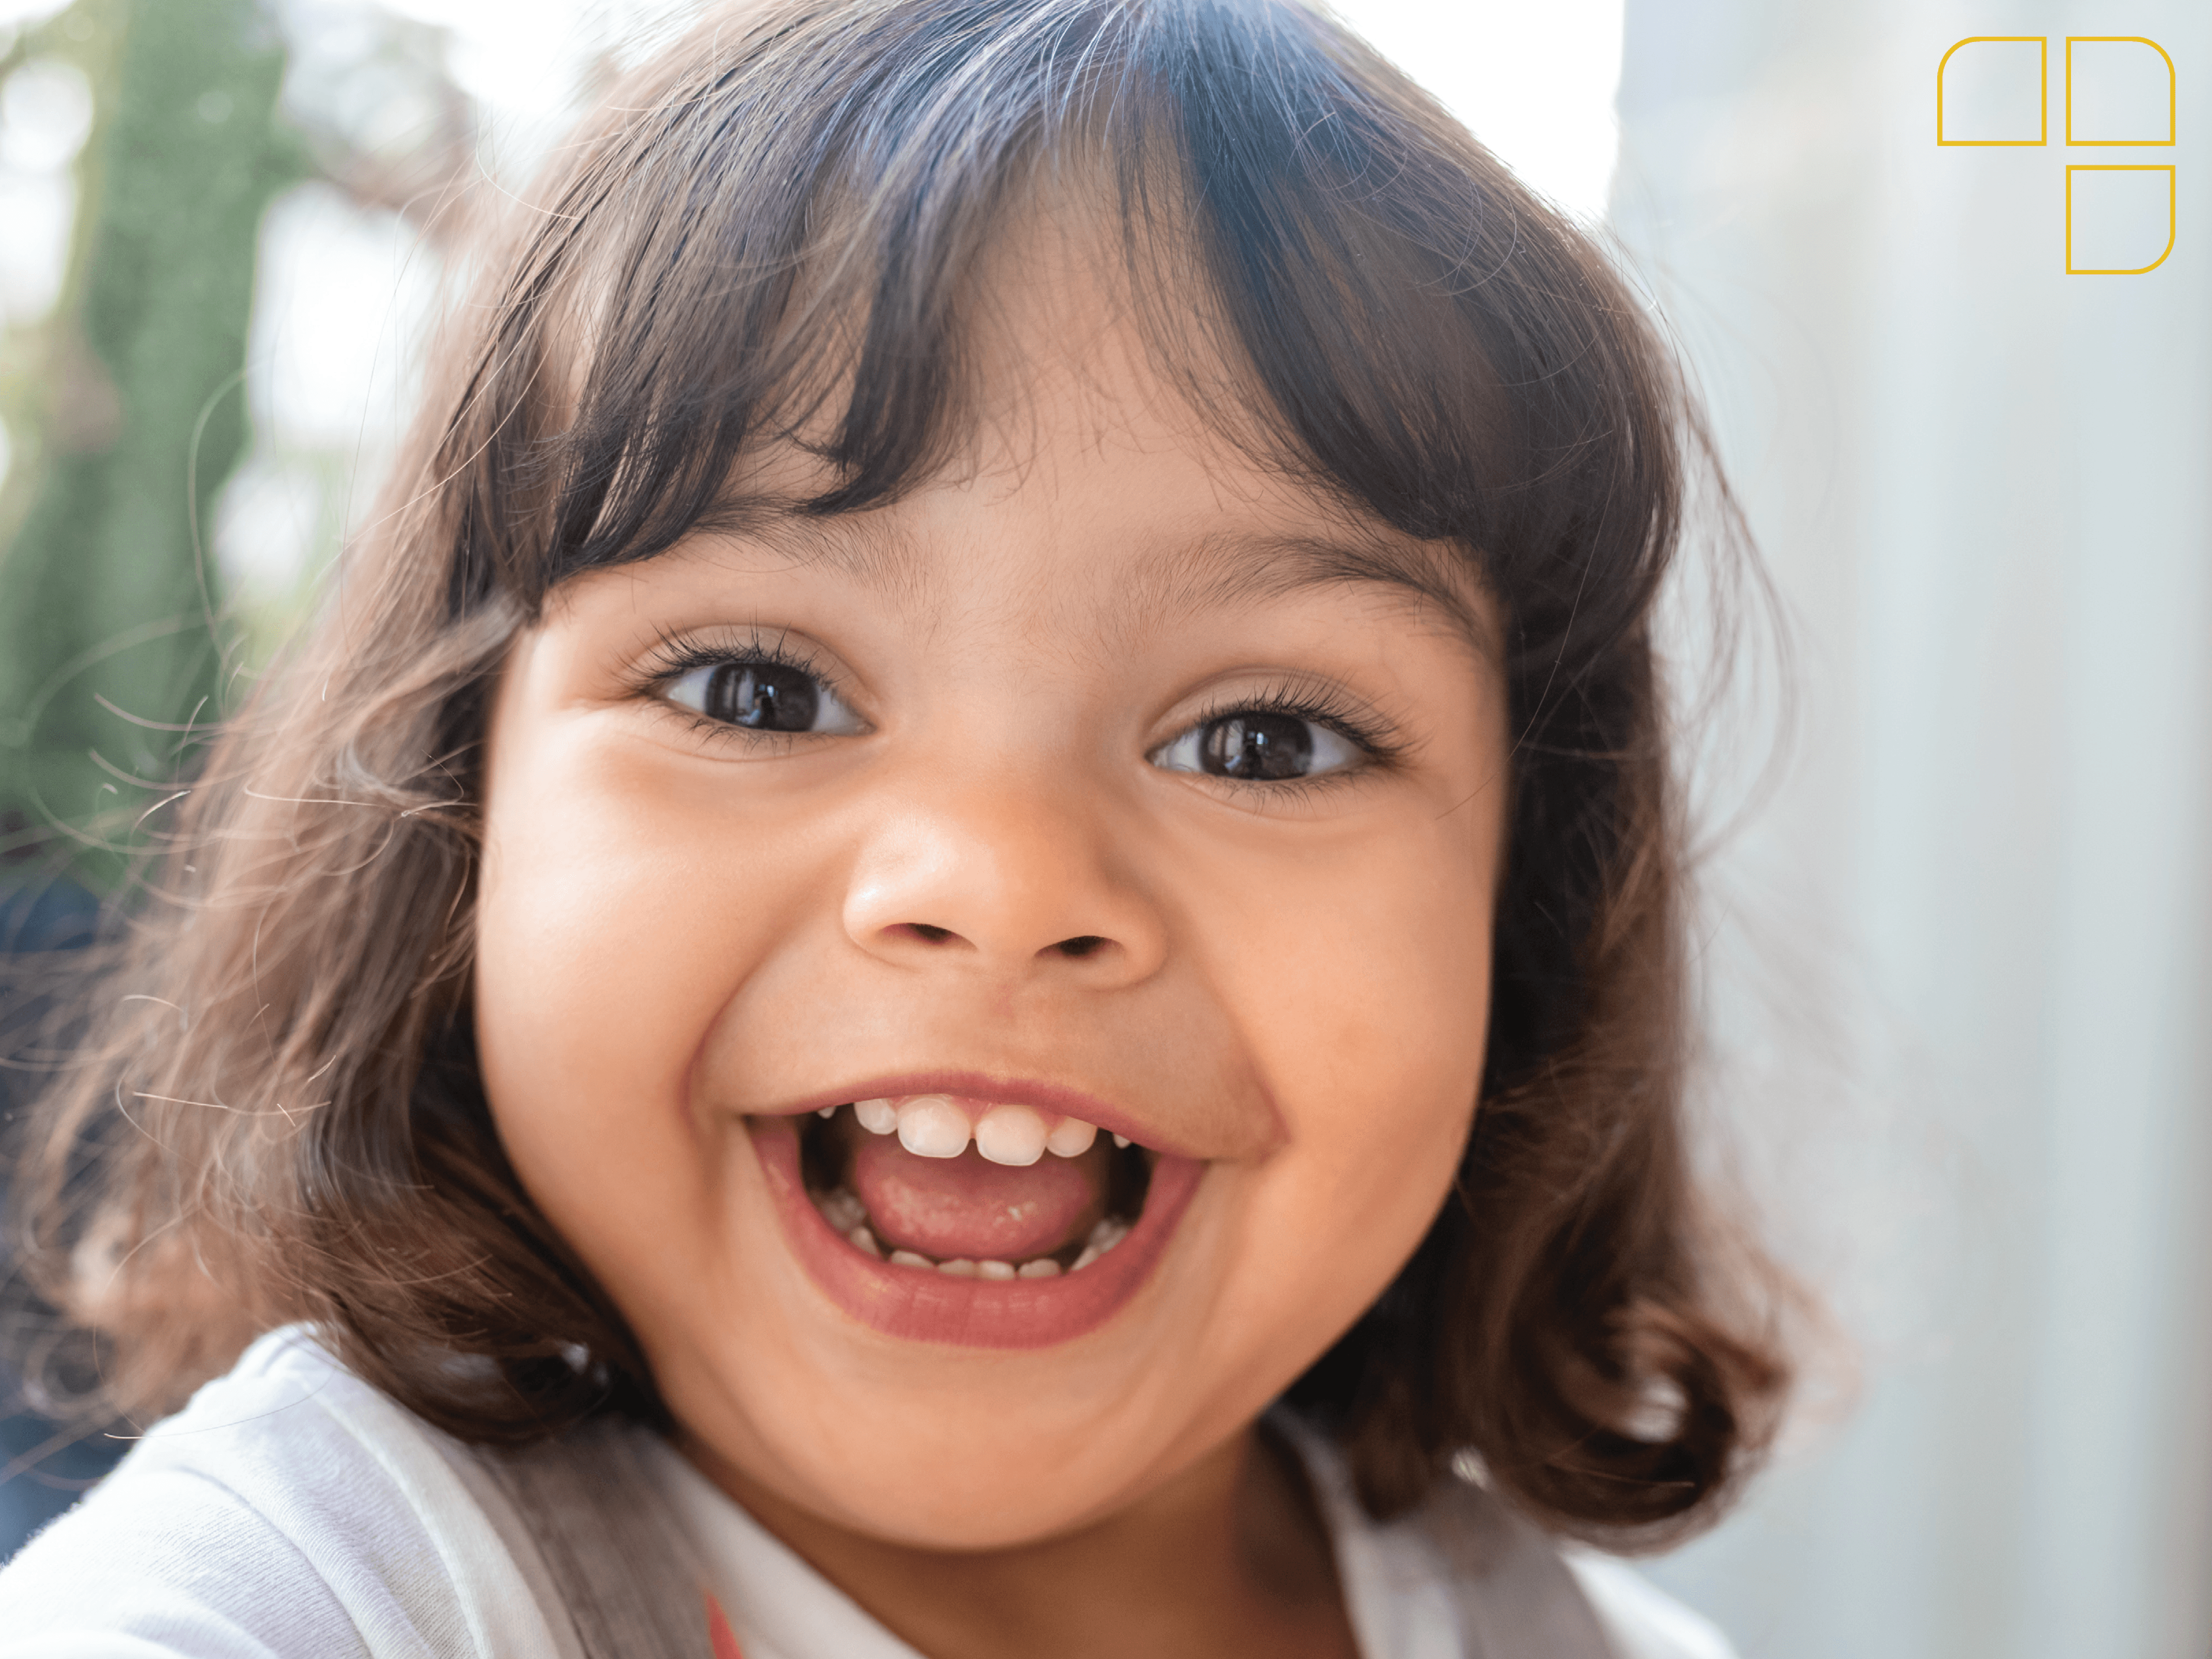 A little girl with short brown hair smiling into the camera